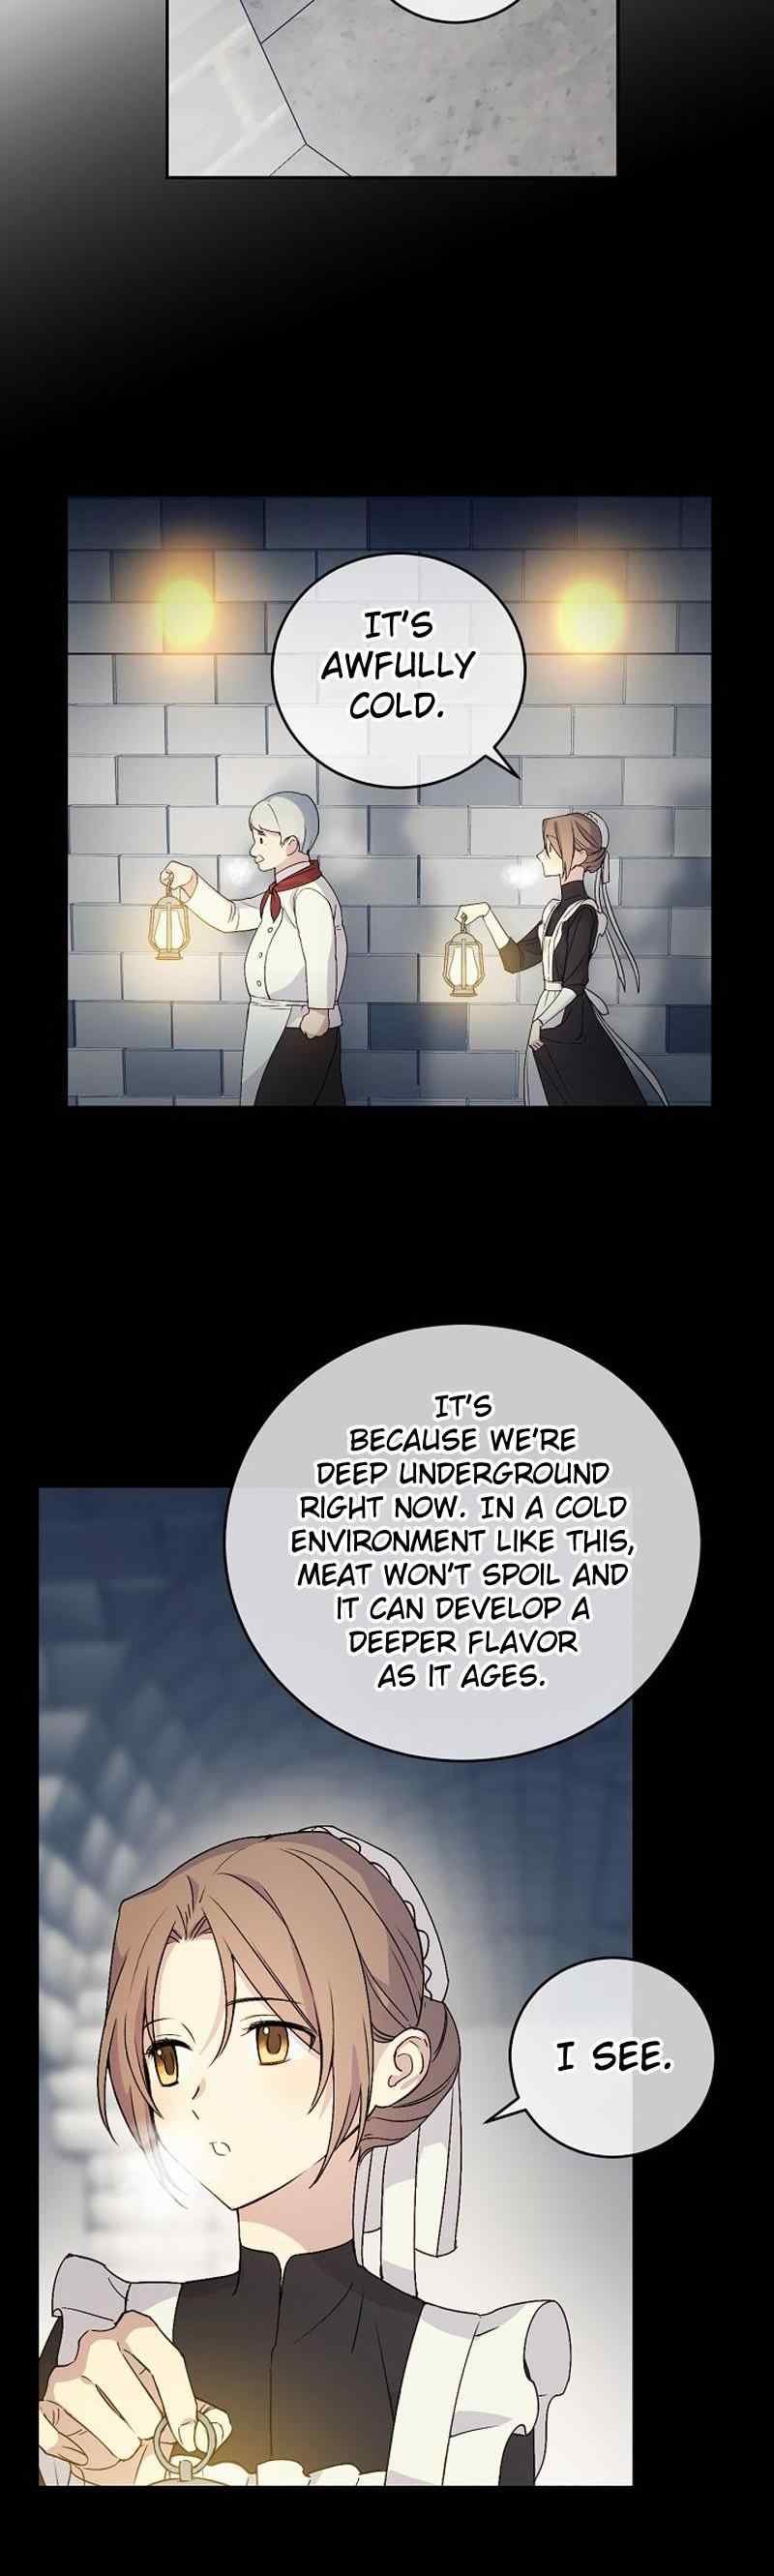 a-capable-maid-chap-12-17